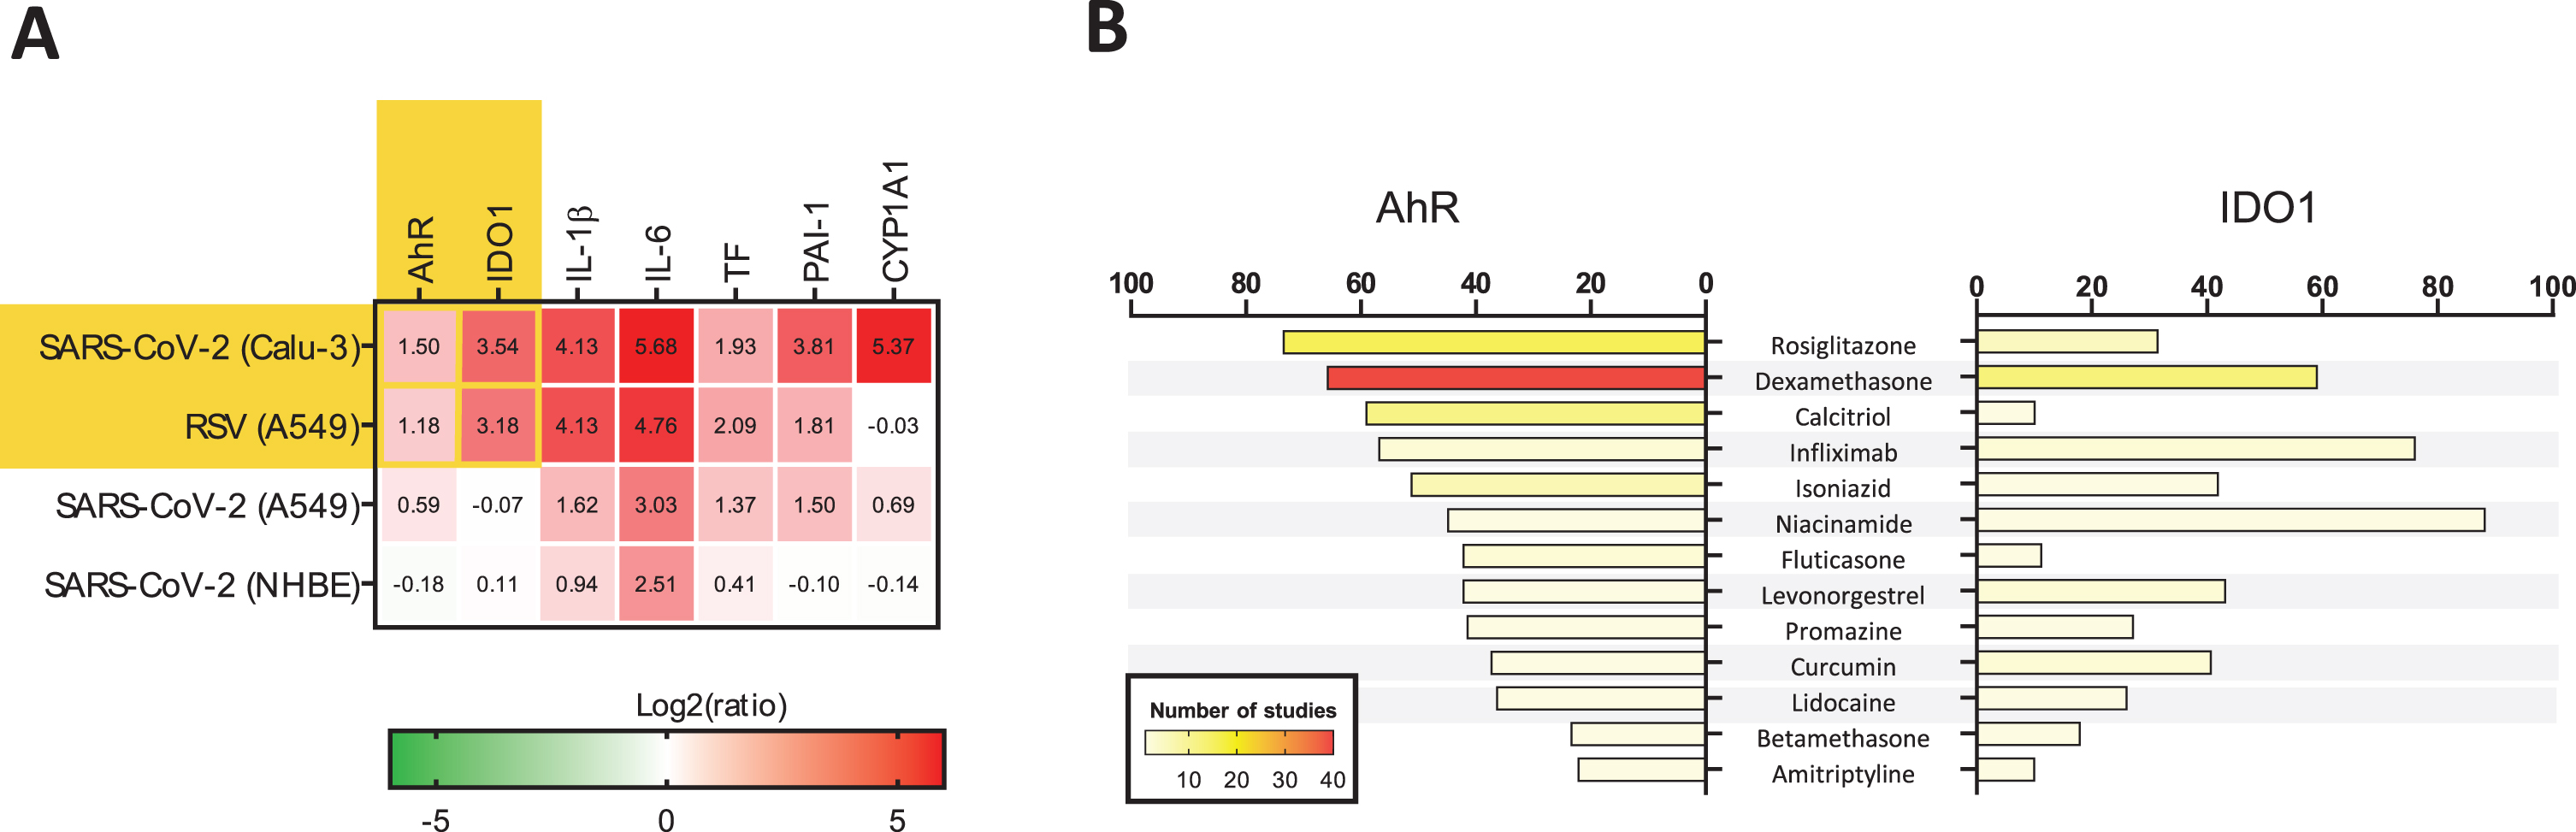 Data mining on the modulation of AhR and IDO1 genes. (A) Conditions under which both AhR and IDO1 genes undergo upregulation were identified using biclustering tool of Genevestigator 7.6.0 (www.genevestigator.com) (Hruz et al., 2008). Query was limited to mRNAseq data from human lung tissues and cell lines. The results are marked with yellow background. It was revealed that significant up-regulation of AHR and IDO1 occurred in the lung adenocarcinoma cell line Calu-3 samples infected with SARS-CoV-2 (USA-WA1/2020 isolate) at a MOI (multiplicity of infection) of 2 and harvested 24 h post-infection (hpi) versus mock-infected Calu-3 cells. Similar observation was made in human lung adenocarcinoma cell line A549 samples infected with respiratory syncytial virus (RSV) A2 strain (MOI 2; 24 hpi) in comparison to mock control (Blanco-Melo et al., 2020). There were no other experimental results demonstrating concurrent upregulation of AHR and IDO1 in the human lung in the Genevestigator database encompassing 2536 mRNAseq studies. Initial heatmap (yellow background) was extended with data on the expression profile of genes driving the AhR-dependent pathologies: inflammation, thrombosis, and fibrosis (Fig. 2). The specific genes code for (1) proinflammatory interleukin 1β (IL–1β) and interleukin 6 (IL-6); (2) thromboembolism-related tissue factor (TF) and plasminogen activator inhibitor-1 (PAI-1); and (3) fibrosis-related P450 cytochrome 1A1 (CYP1A1). Data from A549 and Normal Human Bronchial Epithelial (NHBE) cells infected with SARS-CoV-2 (MOI 2, 24 hpi) were provided for reference. (B) Medications modulating the expression of AhR and IDO1 genes were identified using Pharmaco Atlas of the BaseSpace Correlation Engine software suite (www.nextbio.com) (Kupershmidt et al., 2010). A p-value significance cutoff of 0.05 (without any multiple testing correction) and a minimum absolute fold-change cutoff of 1.2 were used by the software for identification of medications affecting expression of the genes of interest. Then, grading of significant factors was conducted based on the following conditions: (1) total number of medication specific studies in which the gene was measured; (2) number of medication-specific studies in which the gene’s expression was found to be significantly altered; (3) gene’s degree of down- or up-regulation in comparison to all other genes with altered expression within each of the medication studies; (4) consistency of the gene’s association across the medication studies. Additional statistical criteria were applied, such as correction for multiple hypothesis testing, to finally rank the medications. The most significant result was assigned with a numerical score of 100, and the other medications’ scores were normalized to the top-ranked result. Analyses were performed separately for AhR and IDO1 genes. Only medications significantly downregulating both genes were plotted. Numbers of studies are shown by means of the color scale ranging from light yellow (n = 1) to dark red (n = 40).